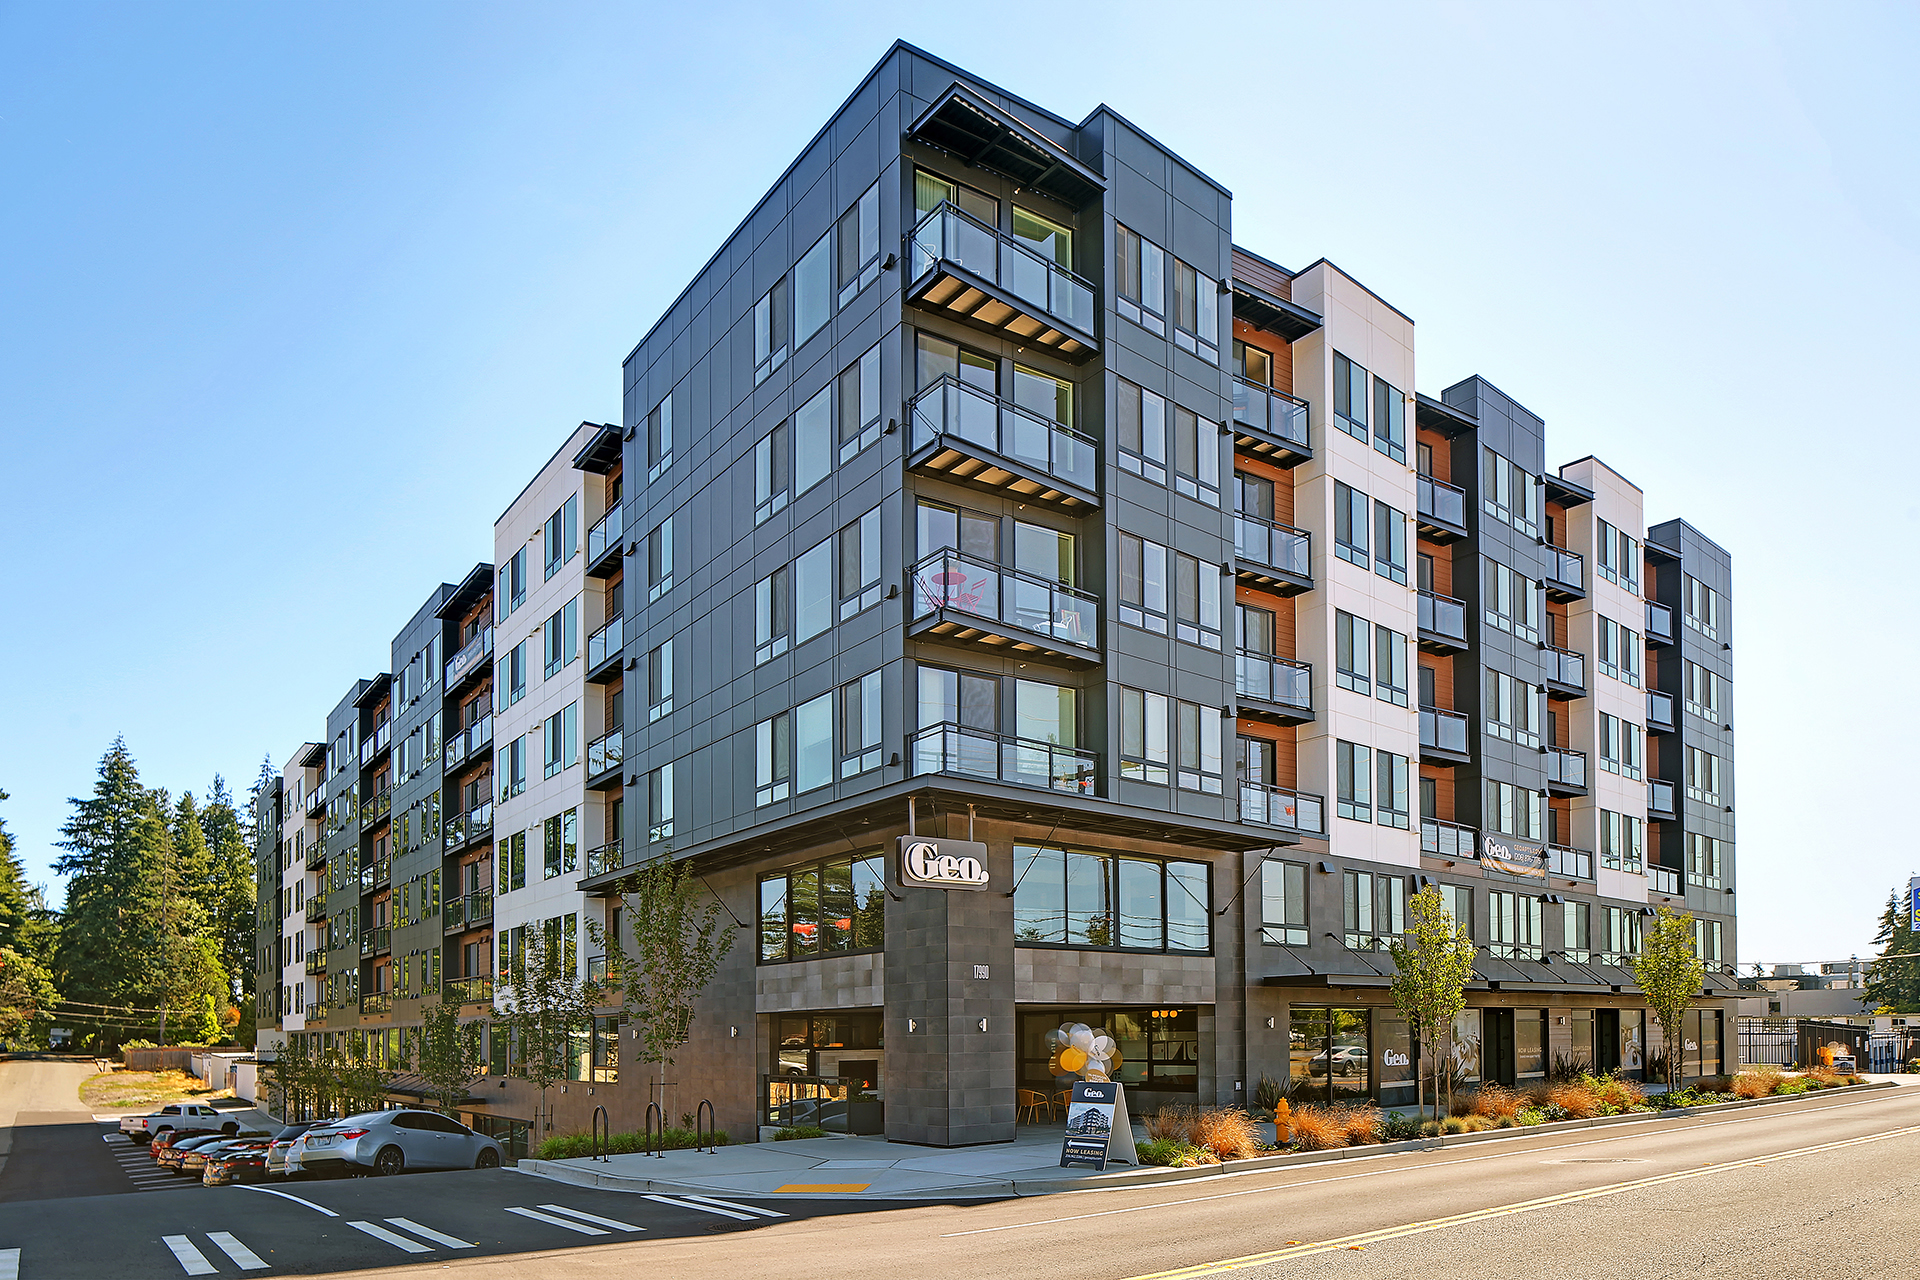 The King County multi-family residential development GEO Apartments, designed by Seattle apartment architect AXIS